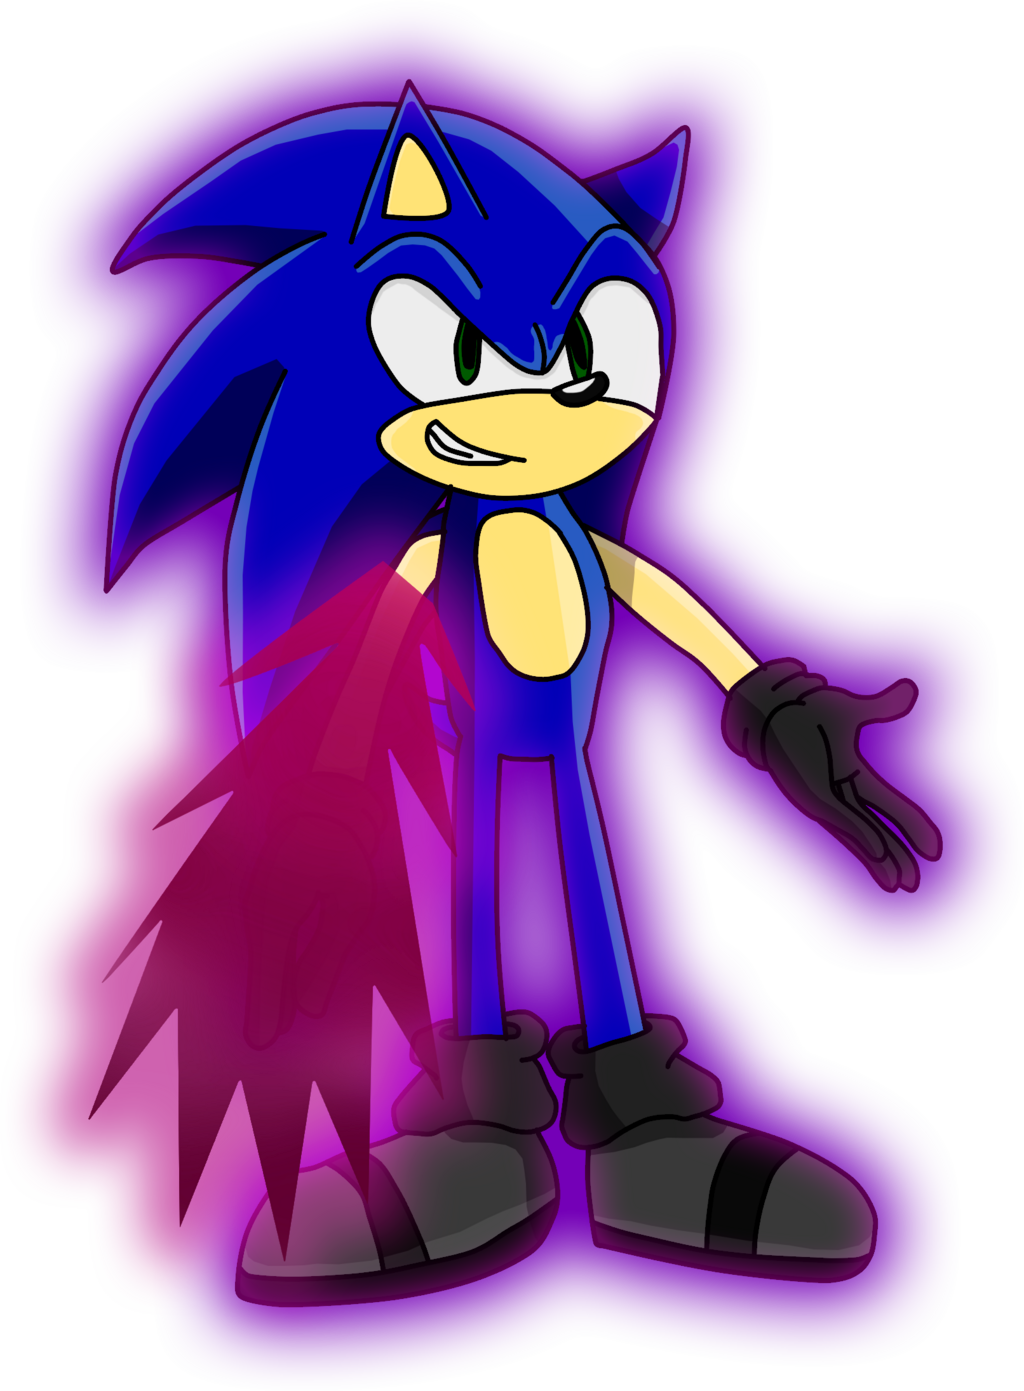 My first drawing: Sonic Black